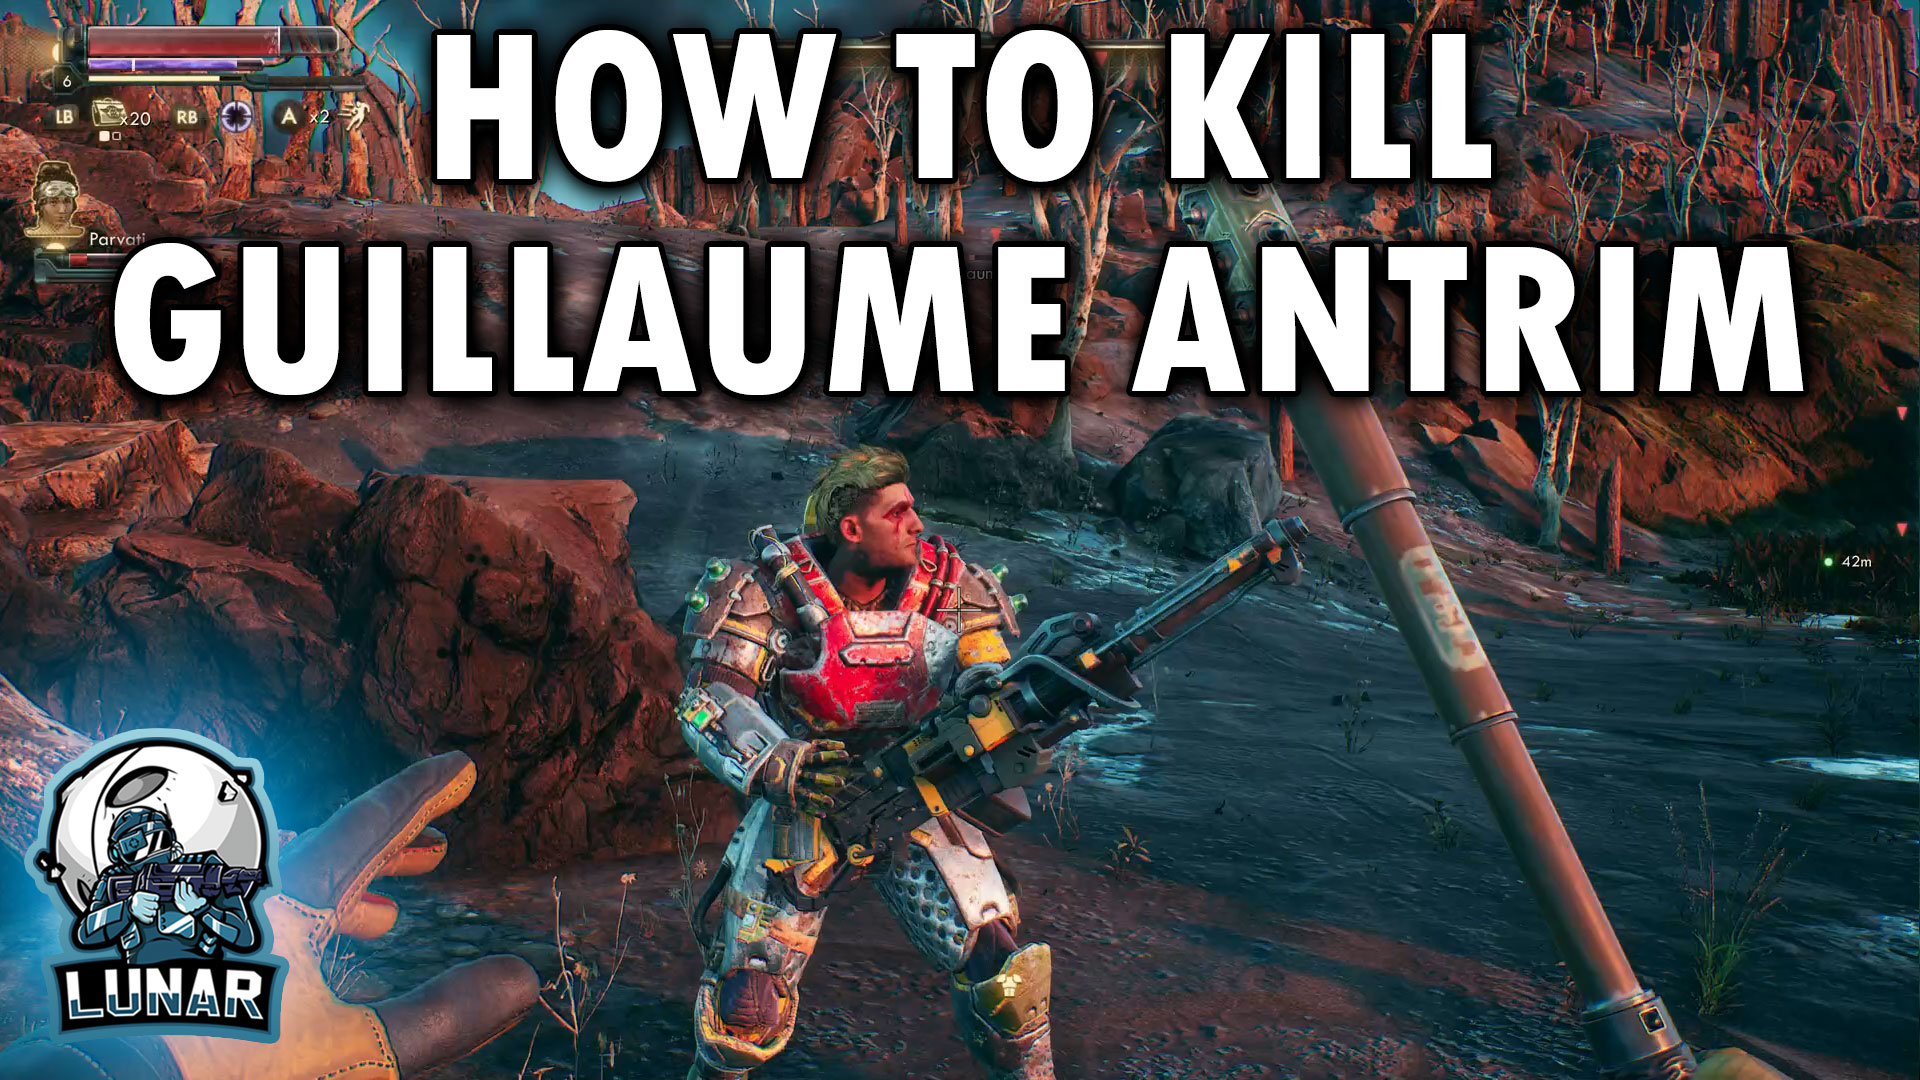 How To Kill Guillaume Antrim The Outer Worlds HOW TO KILL GUILLAUME ANTRIM